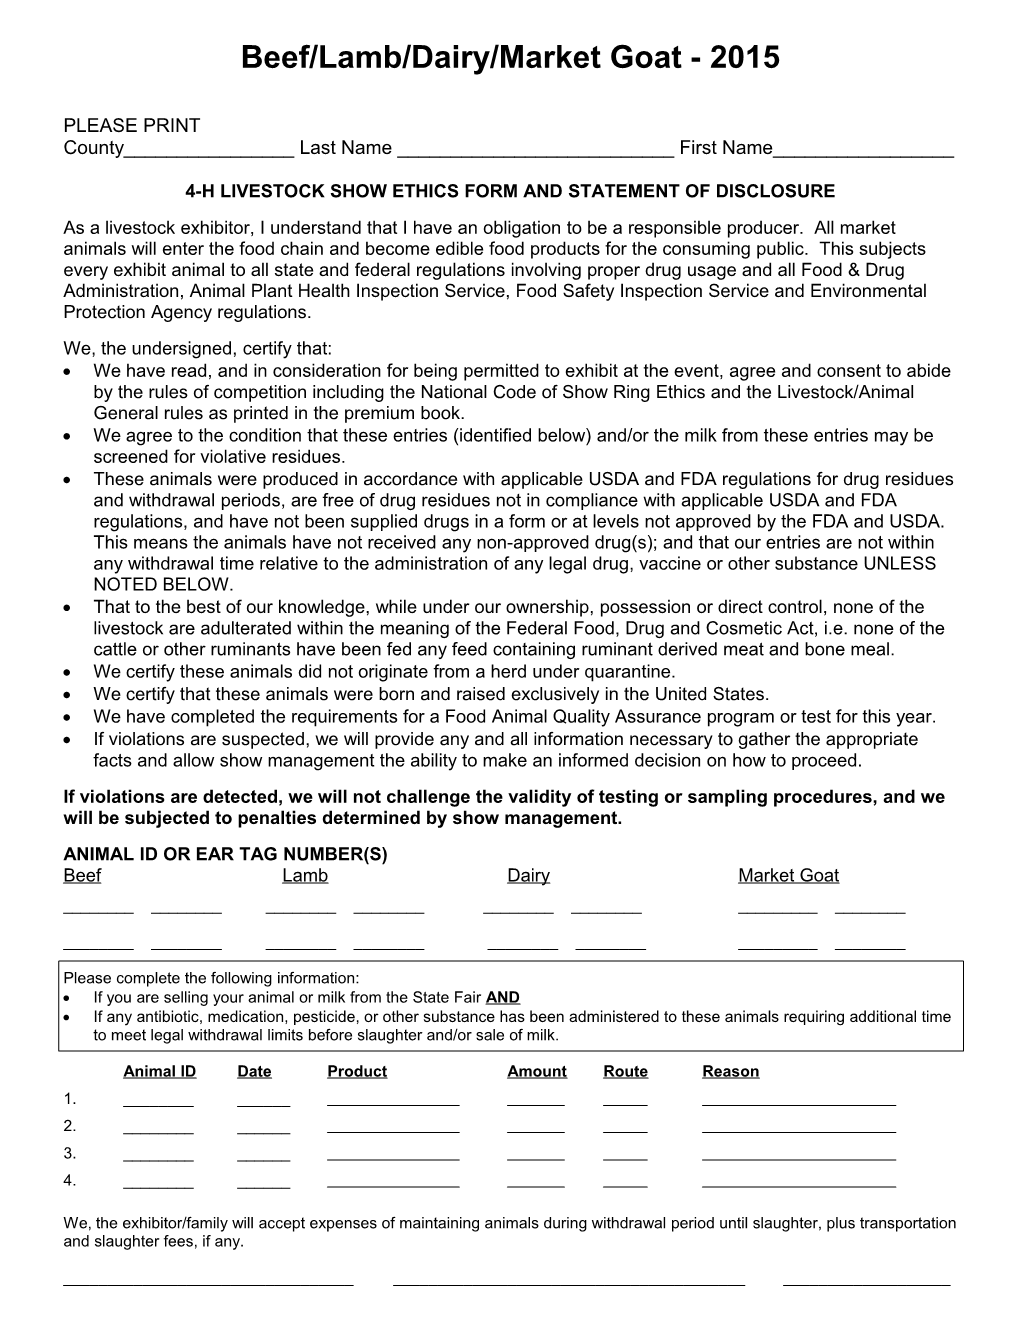 4-H Livestock Show Ethics Form and Statement of Disclosure s1